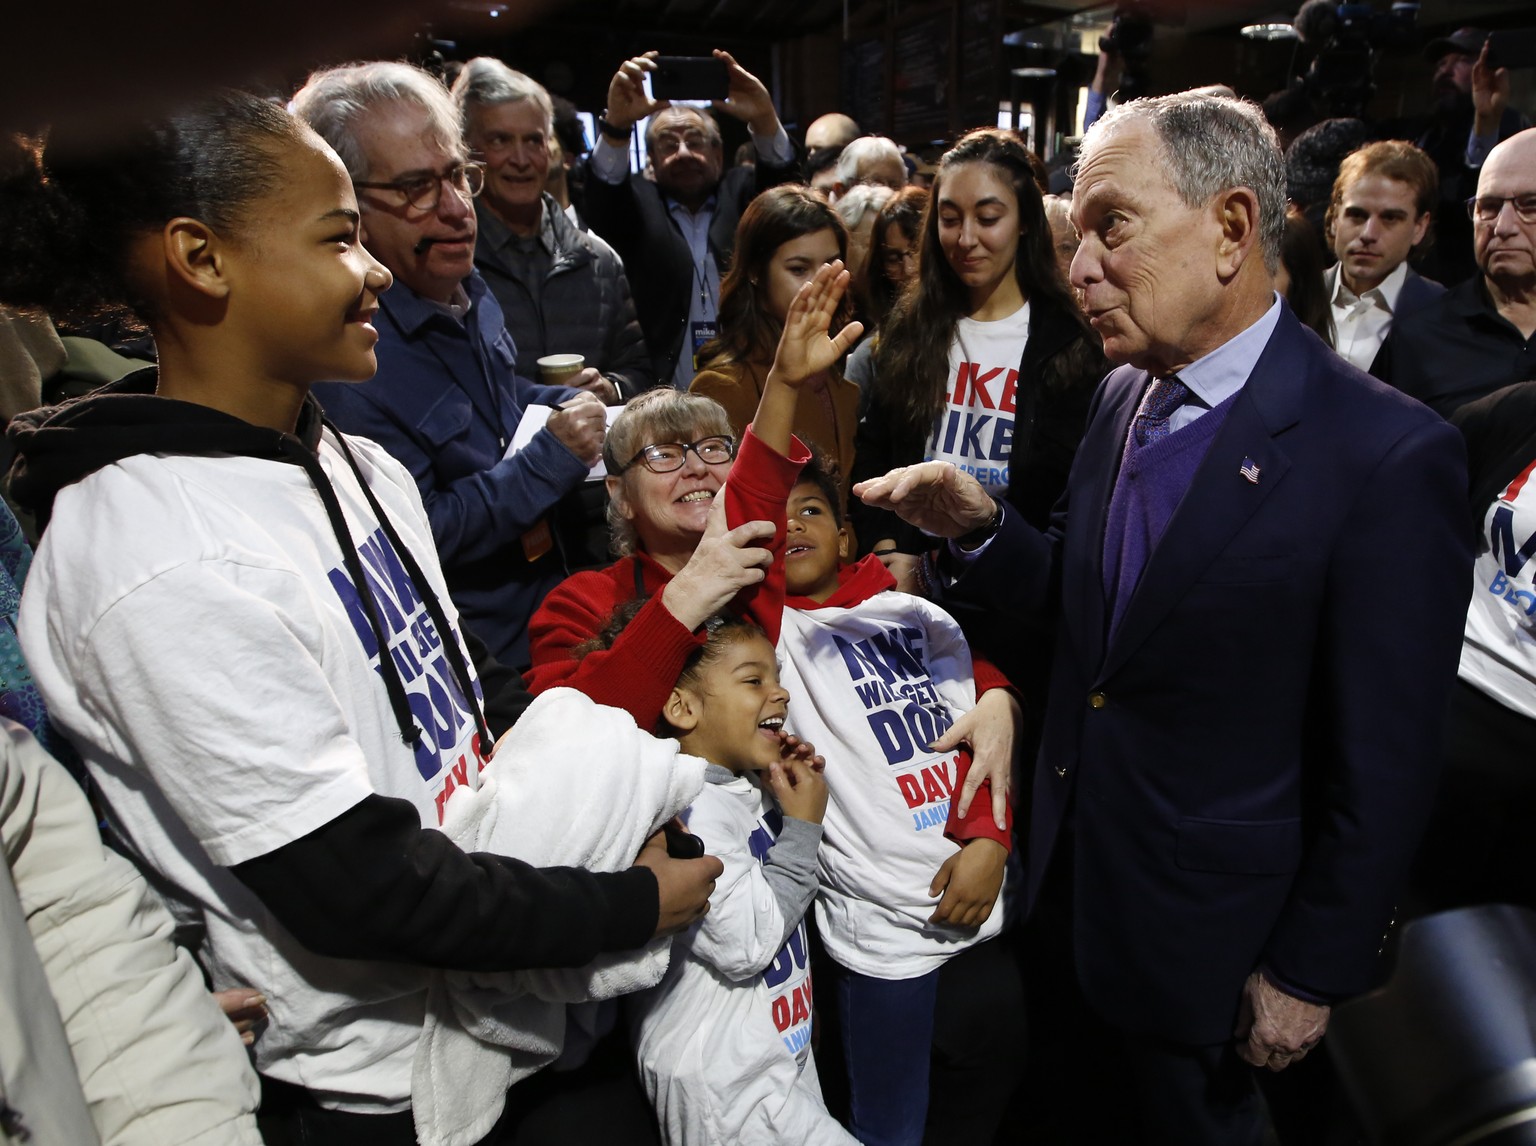 Democratic presidential candidate and former New York City Mayor Michael Bloomberg, right, talks with supporters during a campaign stop in Sacramento, Calif., Monday, Feb. 3, 2020. (AP Photo/Rich Pedr ...